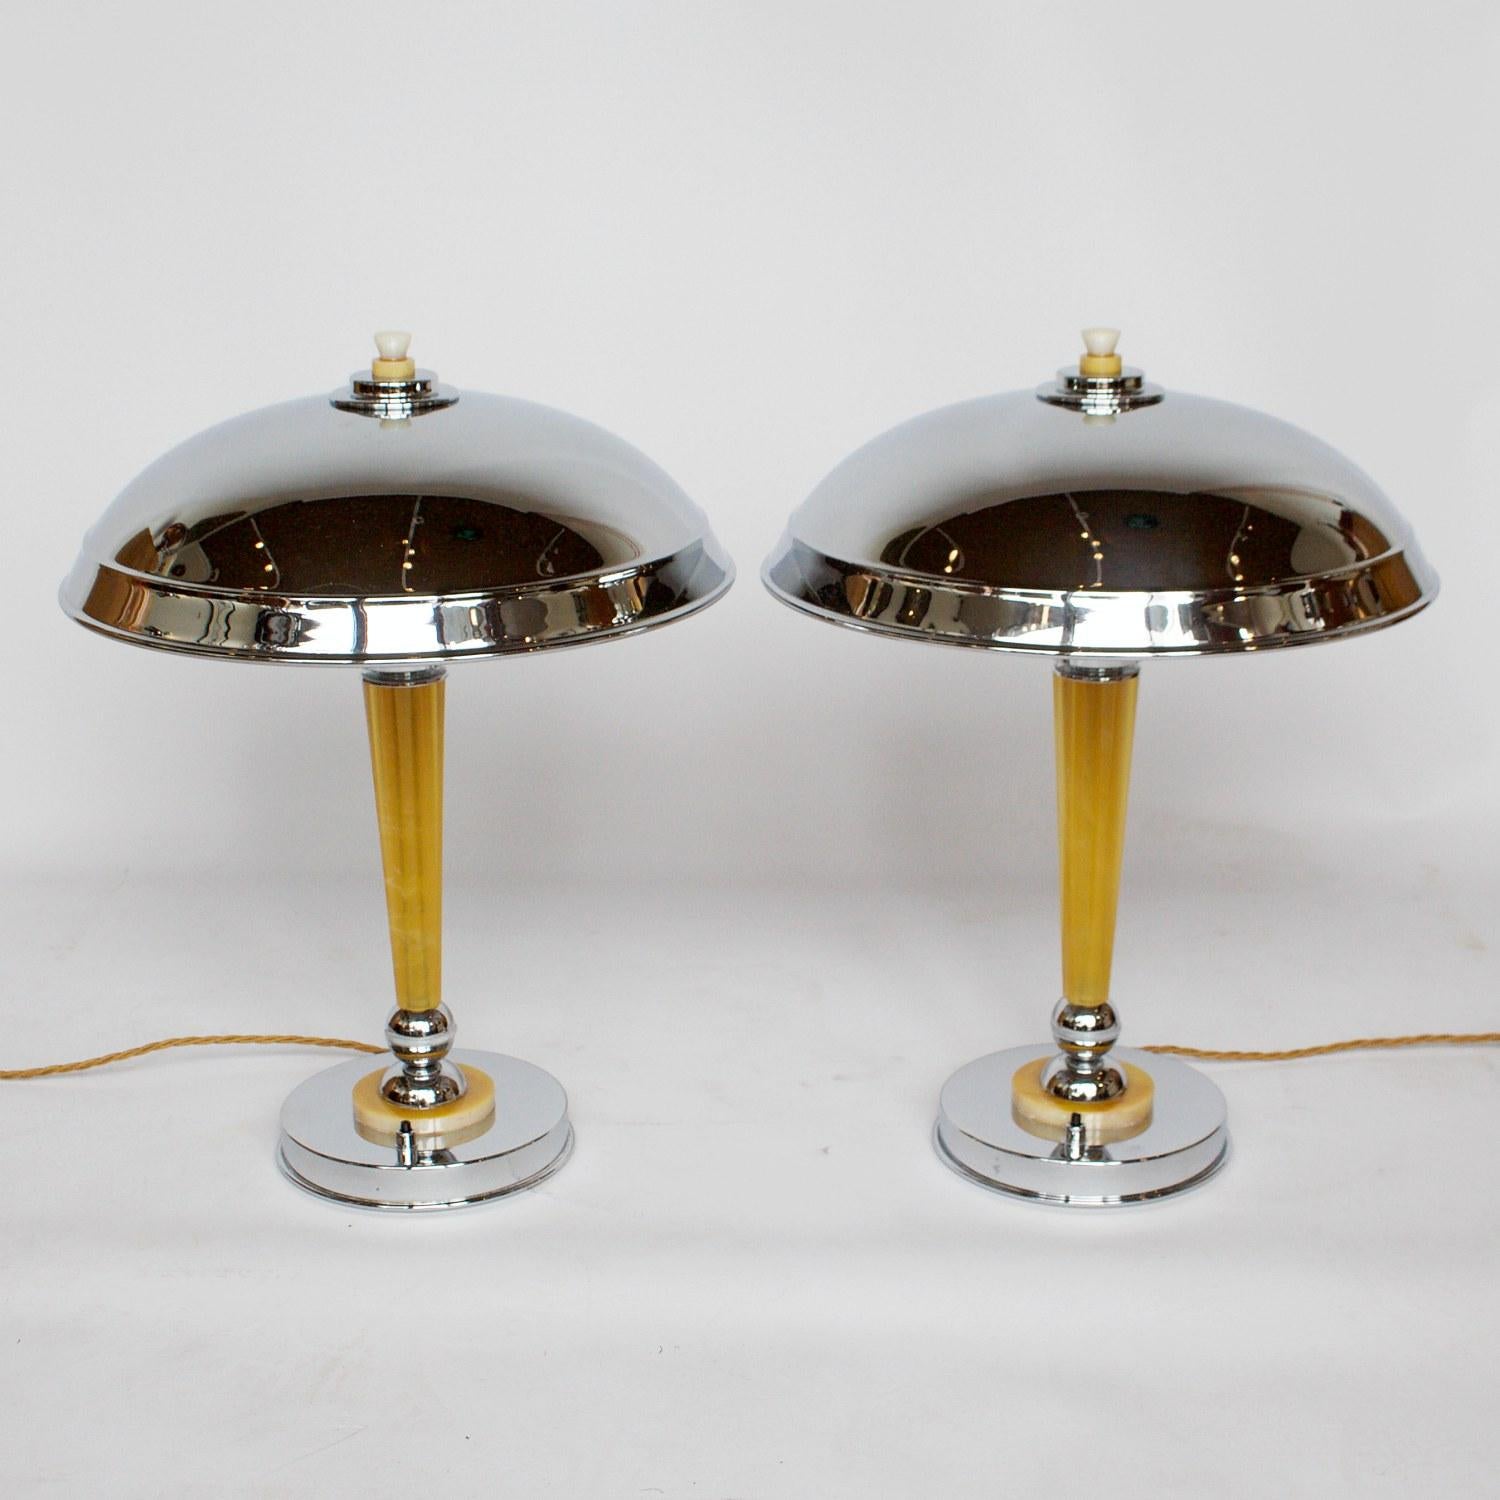 20th Century Pair of Art Deco Chromed Metal and Bakelite Dome Lamps